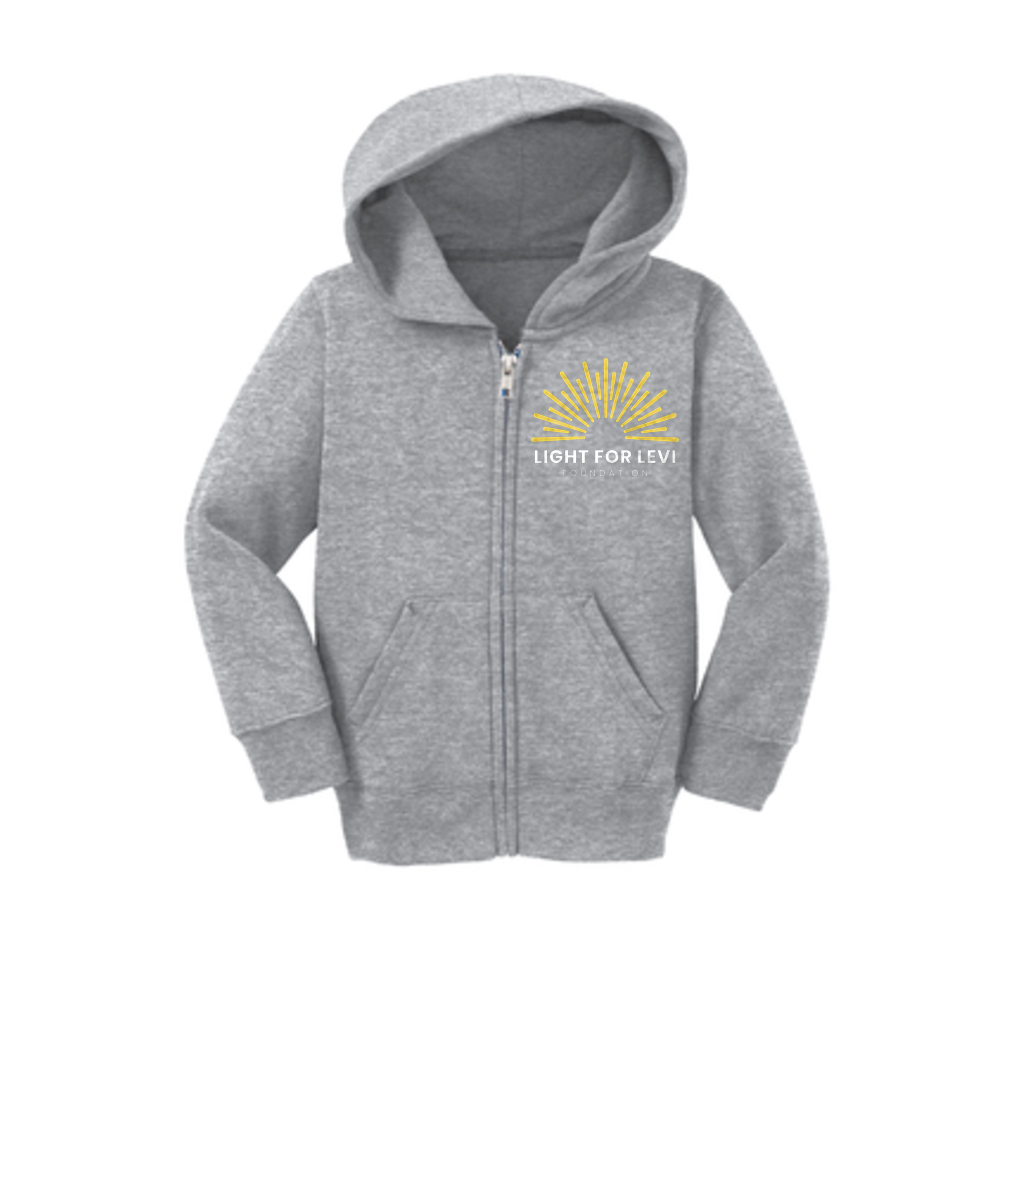 Light For Levi Foundation — Toddler Zip Hoodie